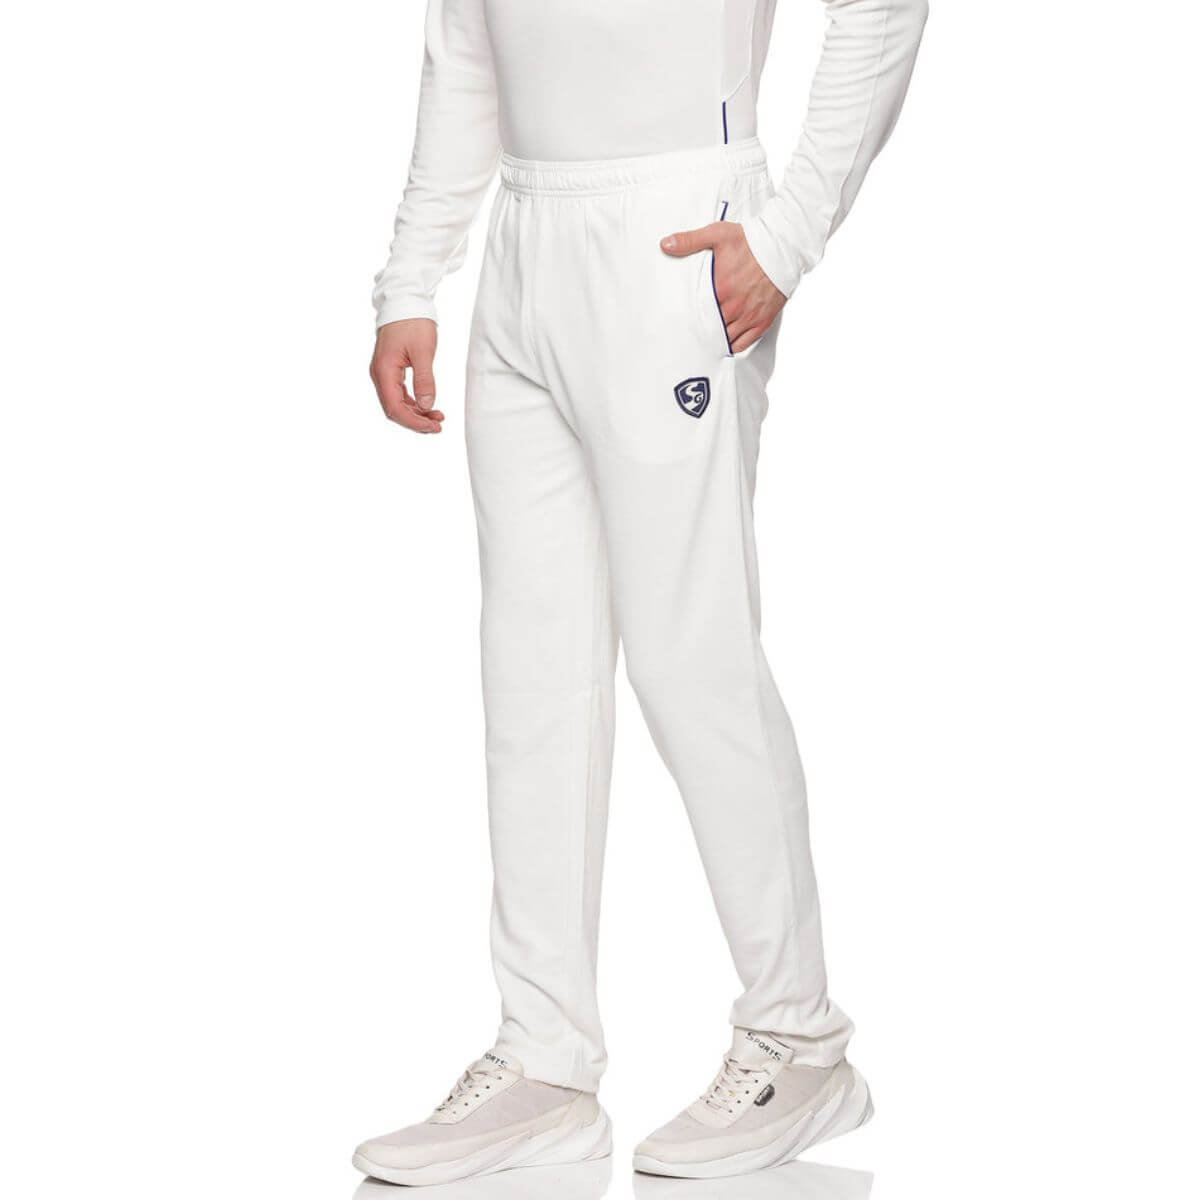 Buy Cricket Clothing Online Australia – Stag Sports